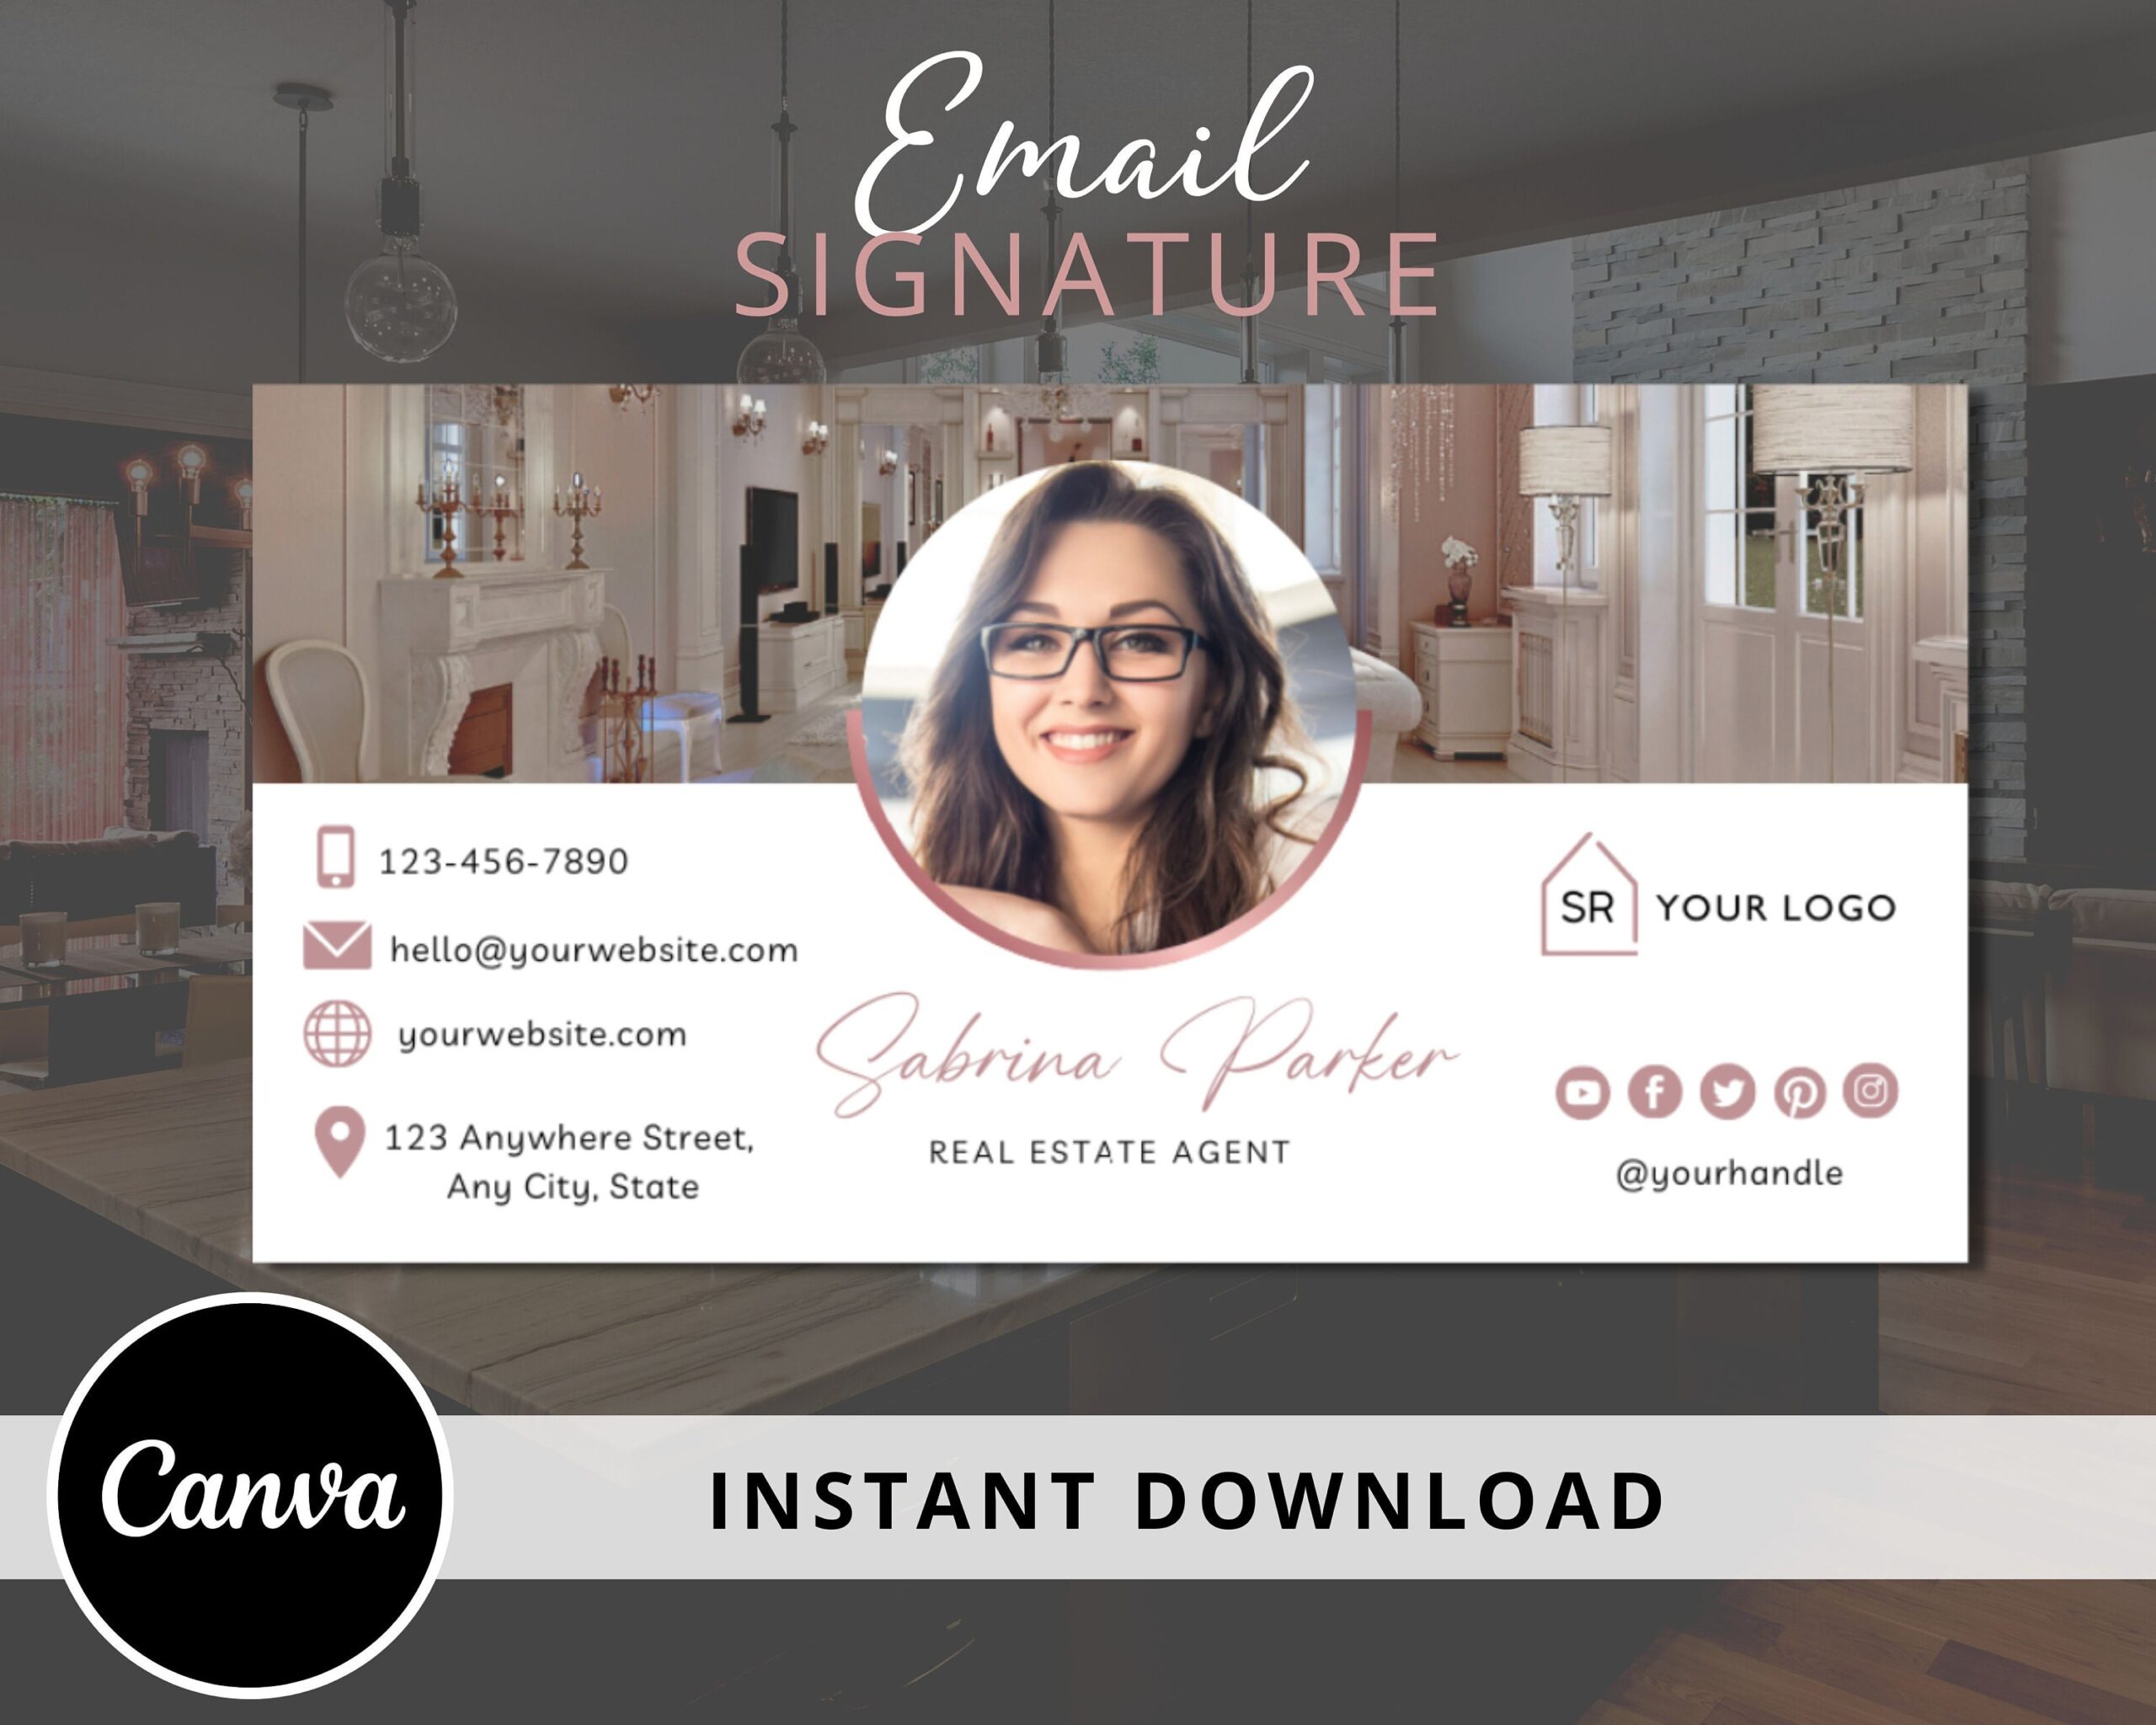 DIY Email Signature, Canva Template, Edit and Download, Email Footer Design, Fully Editable, Real Estate Marketing Material for Agents